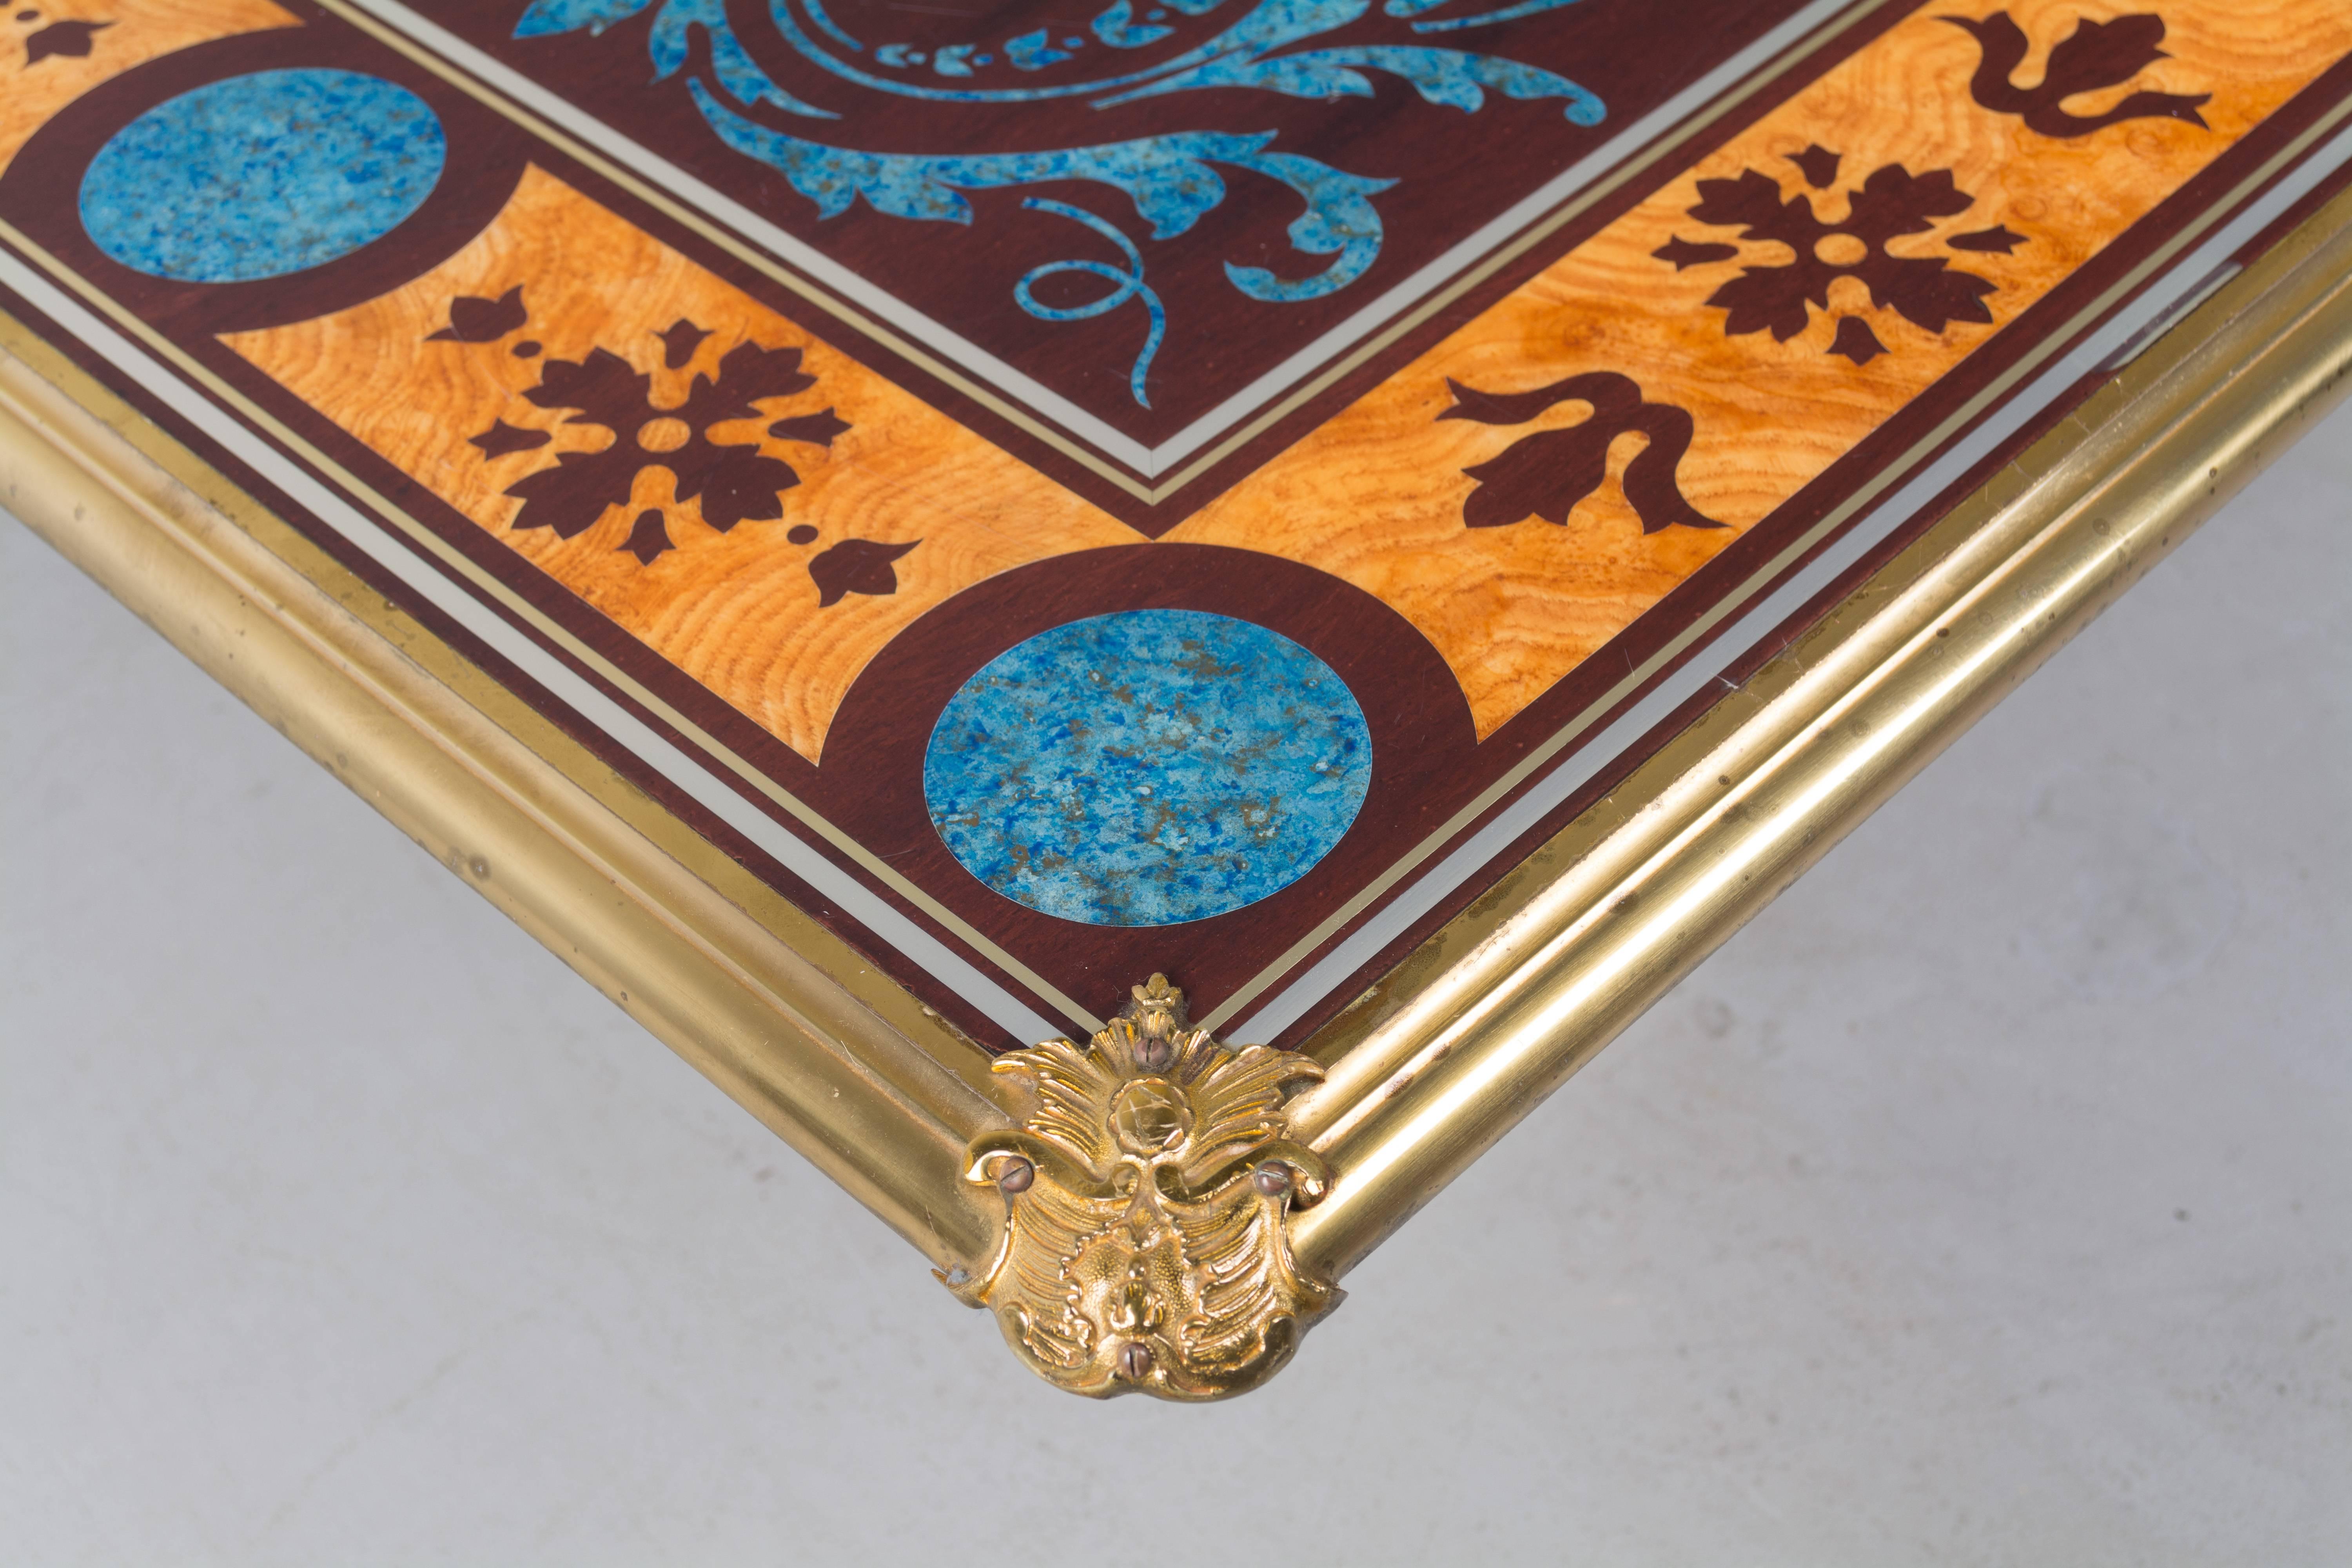 A French midcentury Hollywood Regency style table top designed by Claude Dalle for Maison Romeo, Paris. Faux painted to look like an inlaid design of lapis and exotic woods. Surface is protected by plexiglass and surrounded by a polished brass